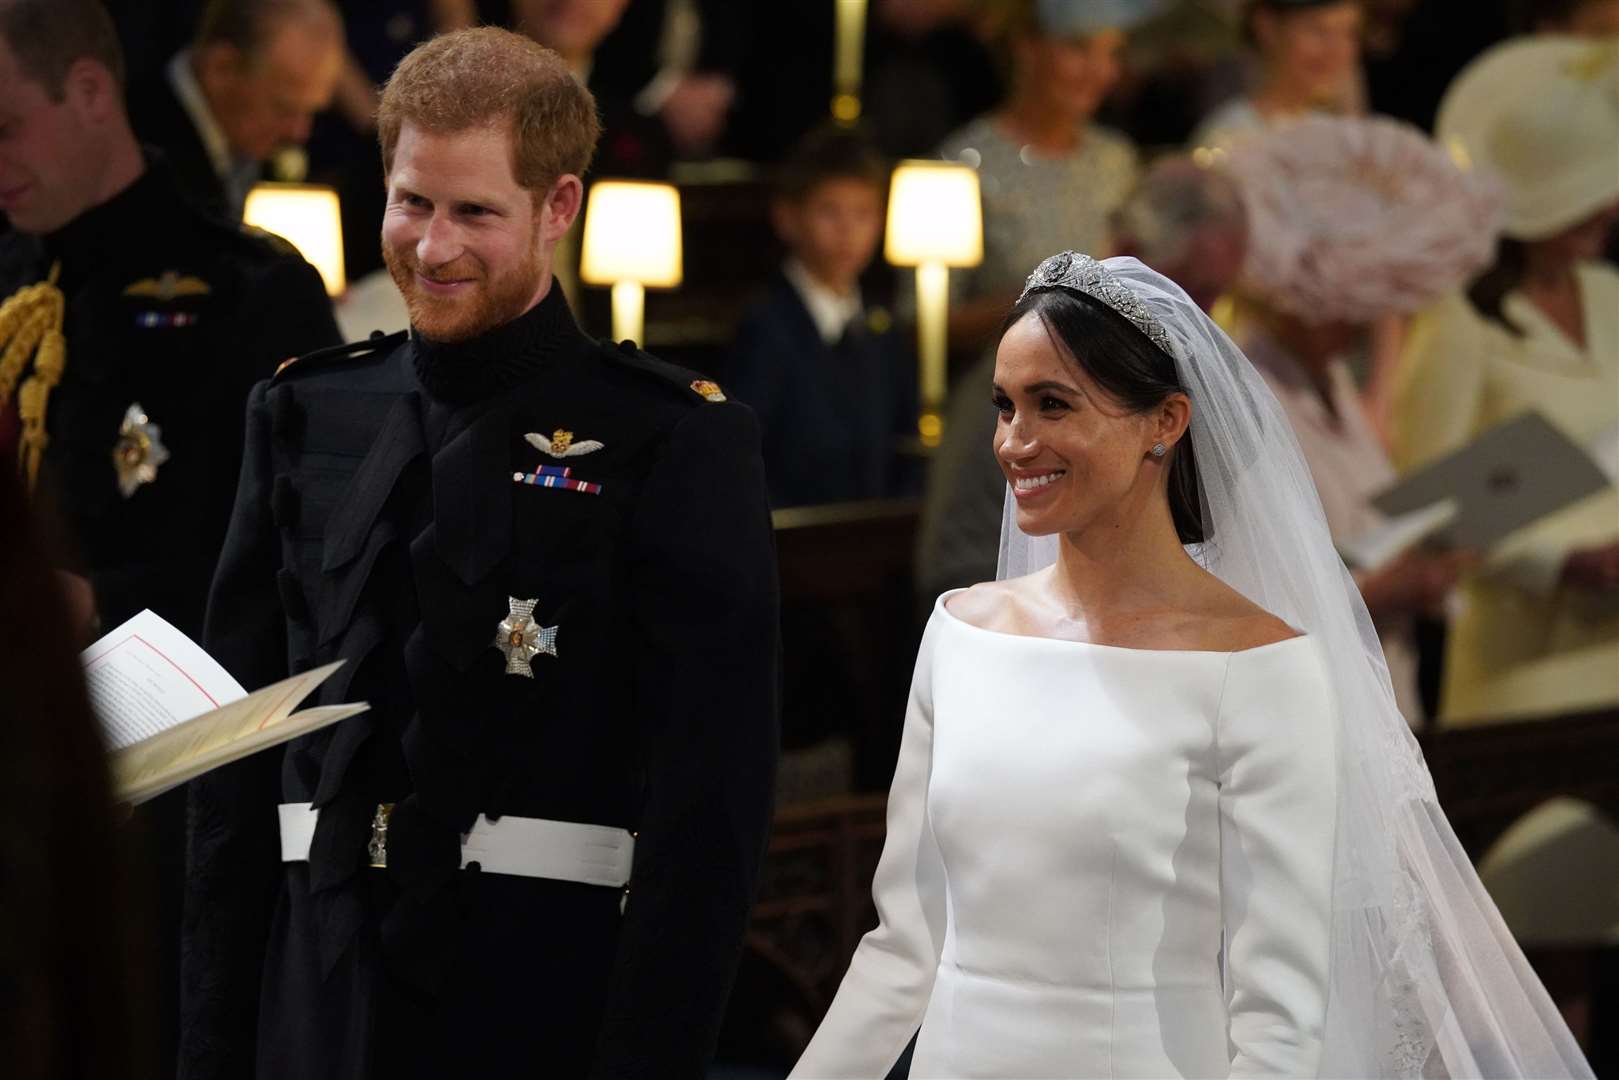 Prince Harry and Meghan Markle in St George's Chapel at Windsor Castle during their wedding service. Photo credit: Jonathan Brady/PA Wire.